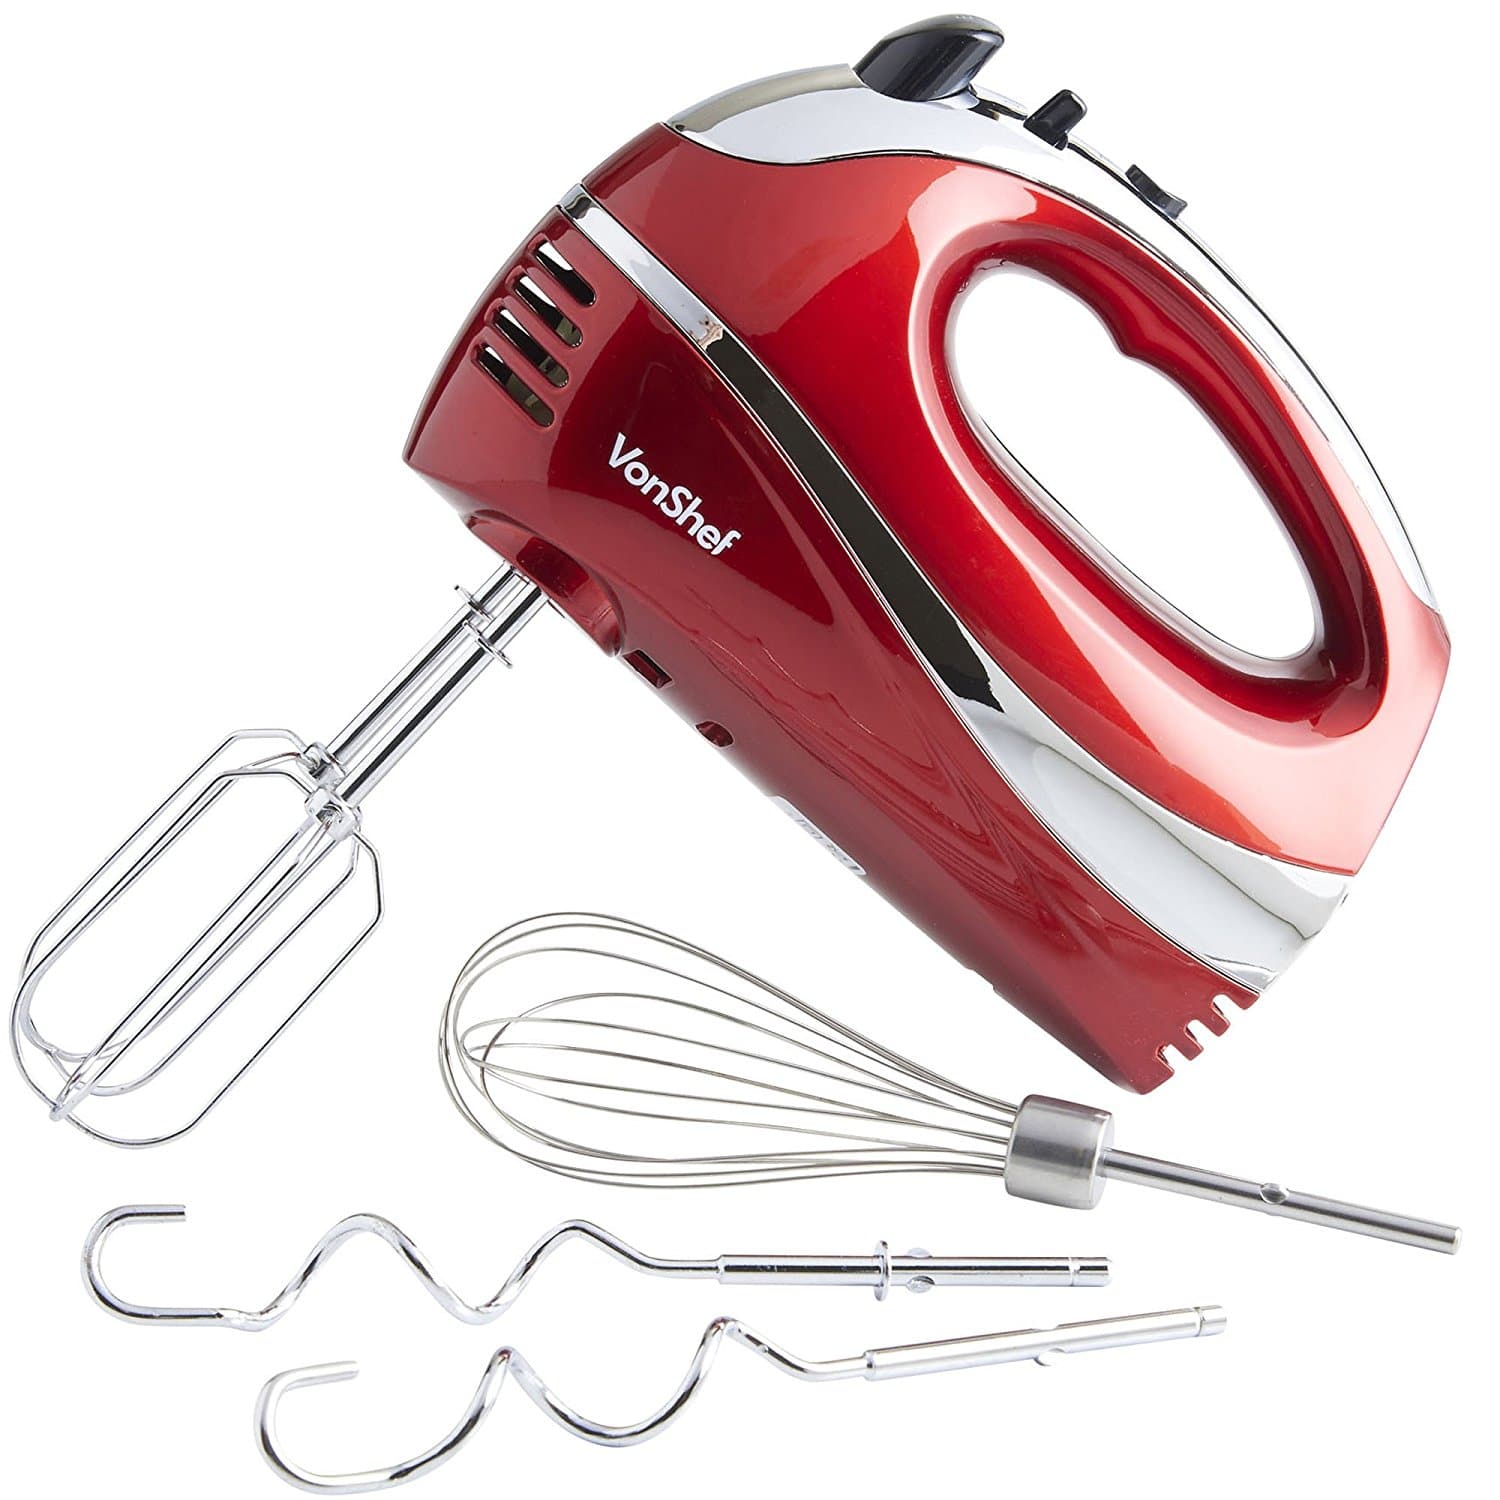 Best Hand Mixers 2018 Reviews and Buyer's Guide